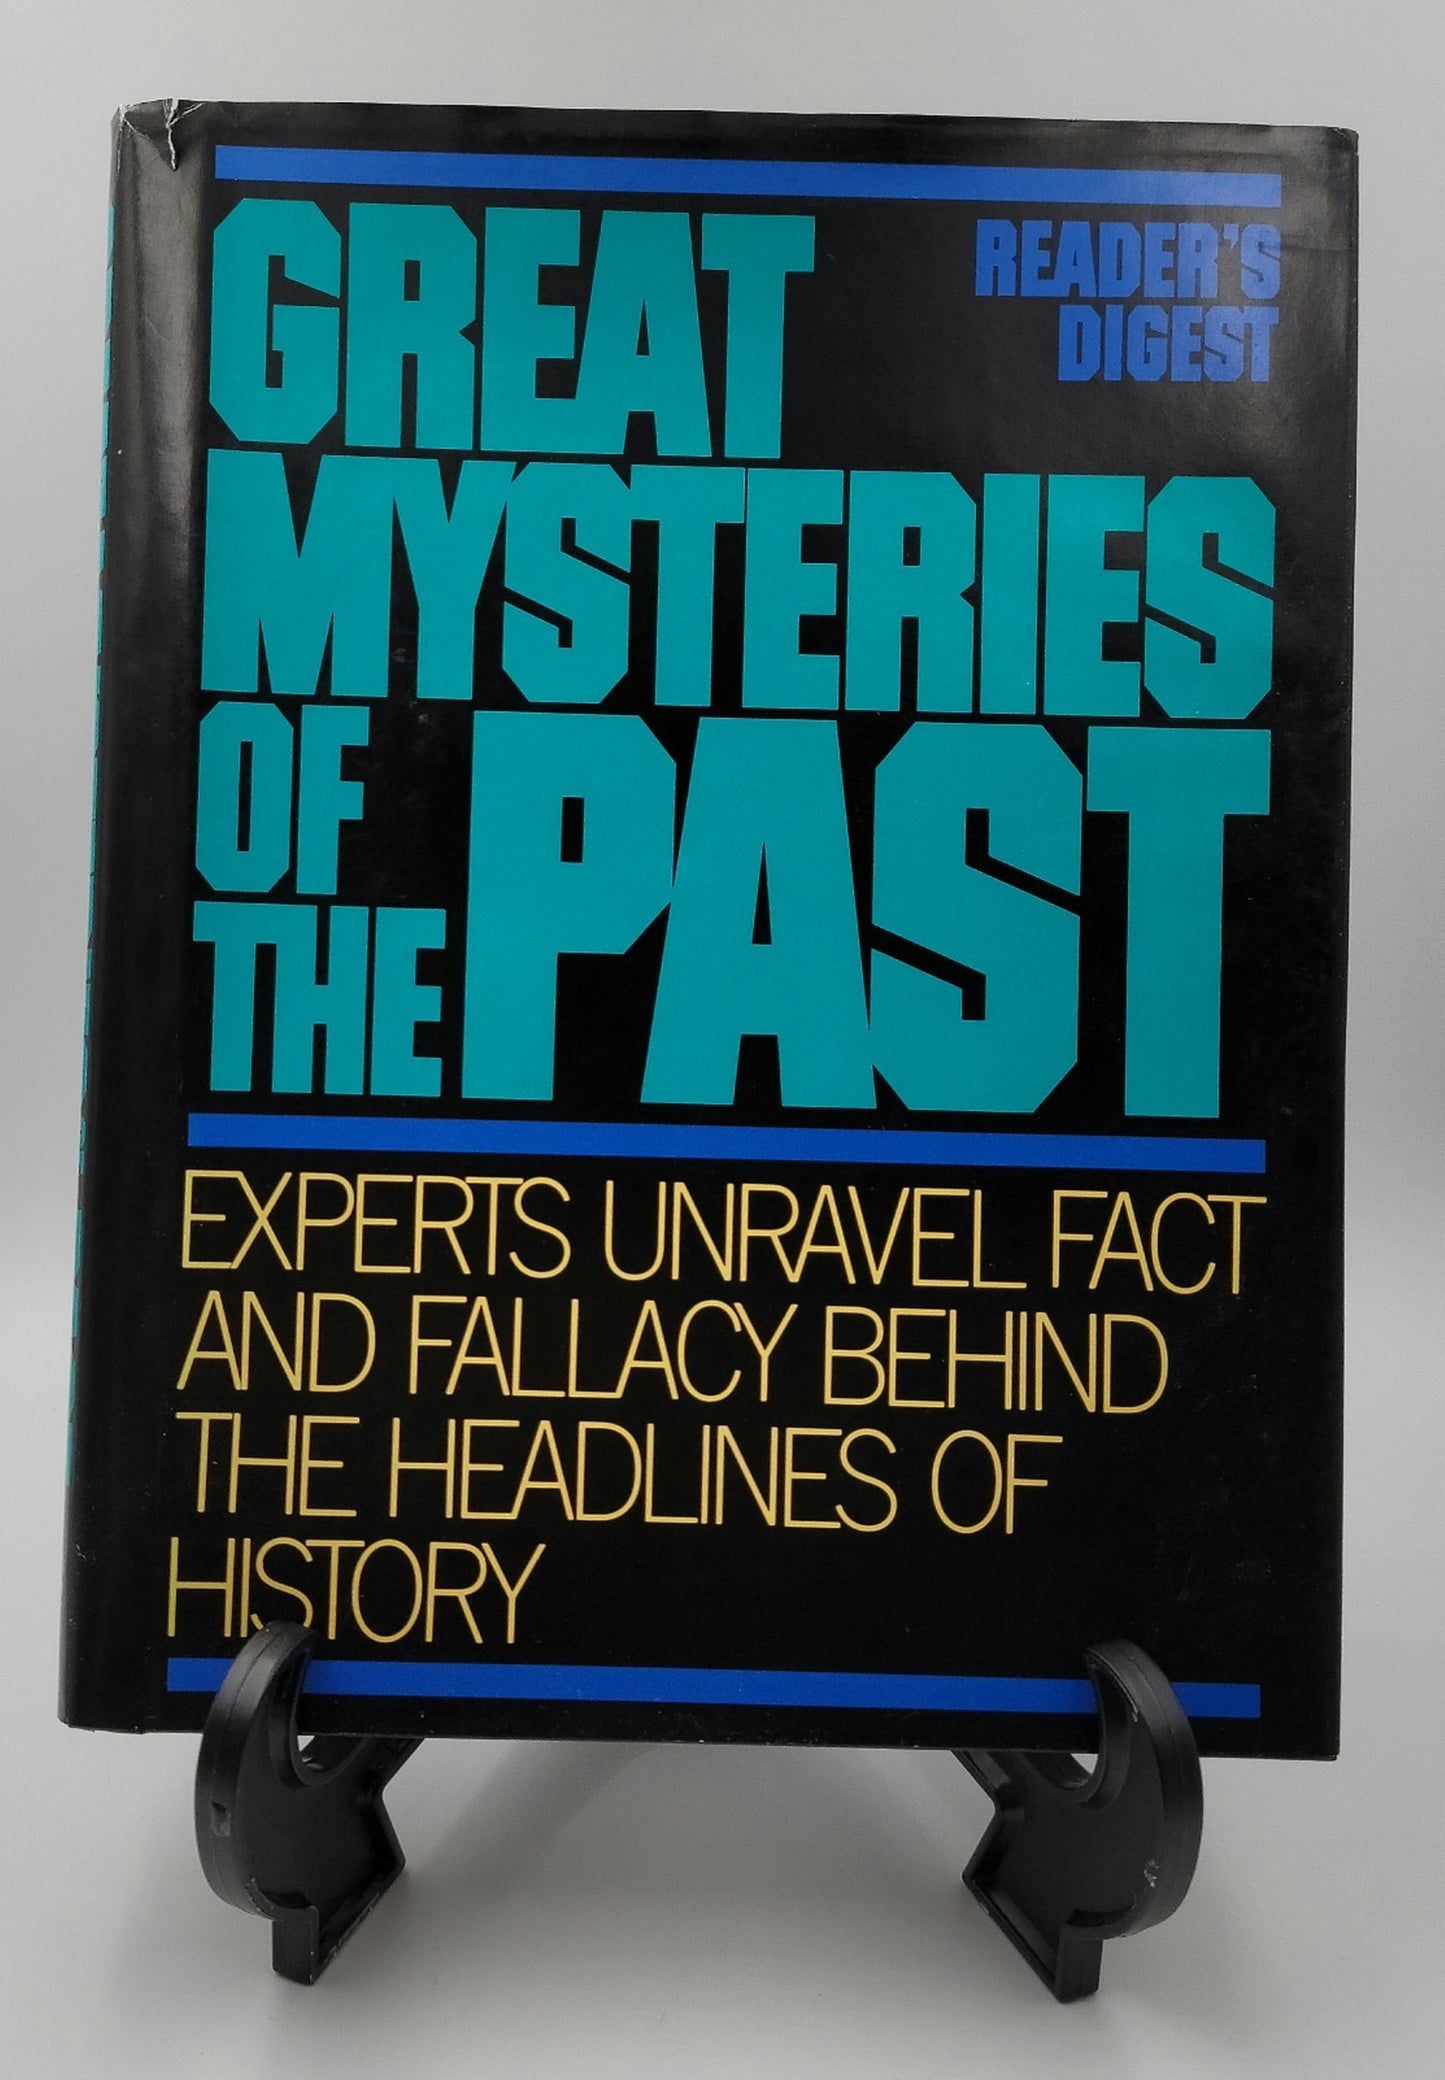 Great Mysteries of the Past from Reader's Digest